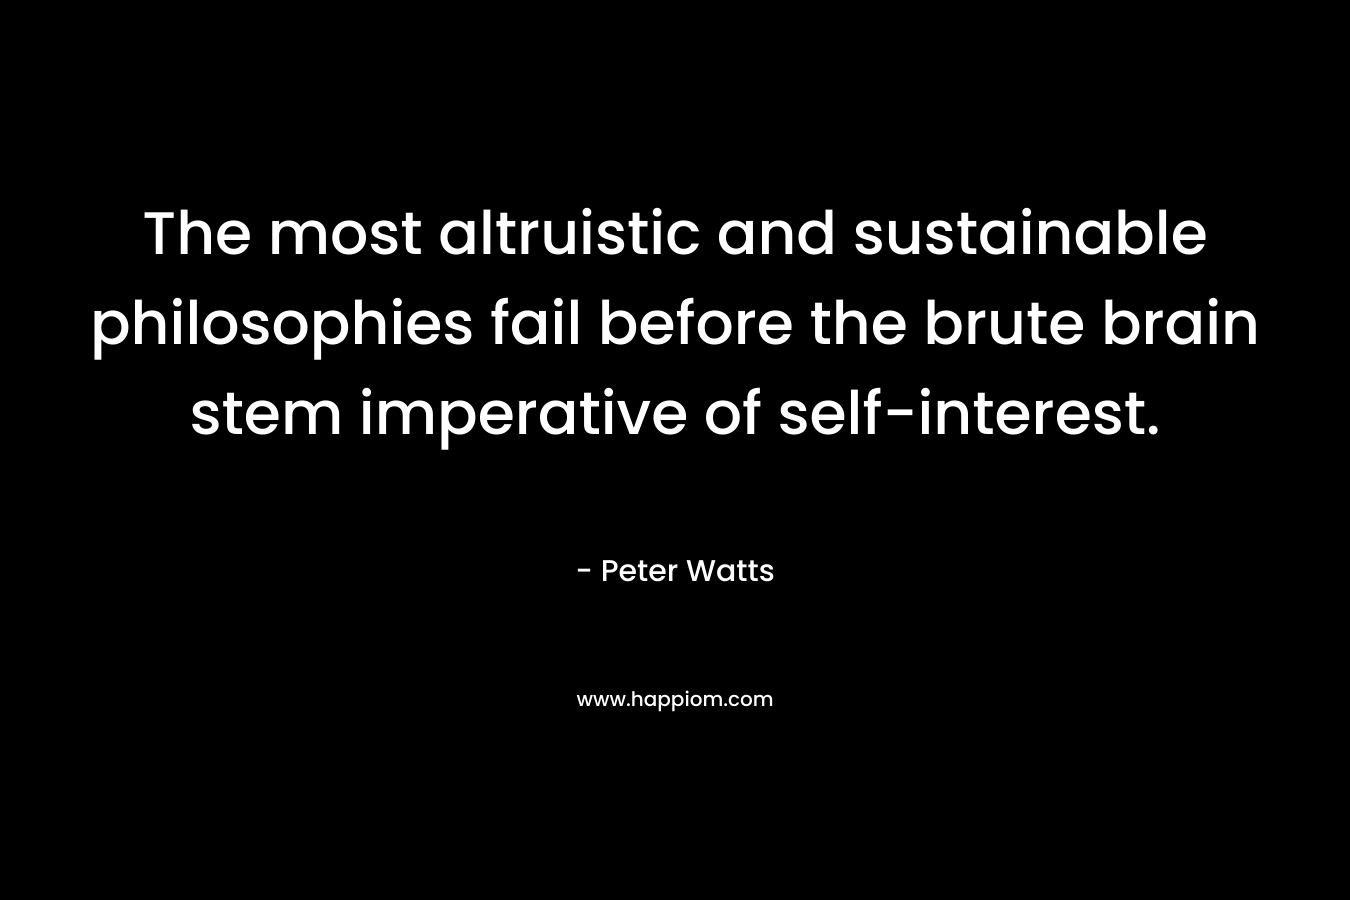 The most altruistic and sustainable philosophies fail before the brute brain stem imperative of self-interest. – Peter Watts